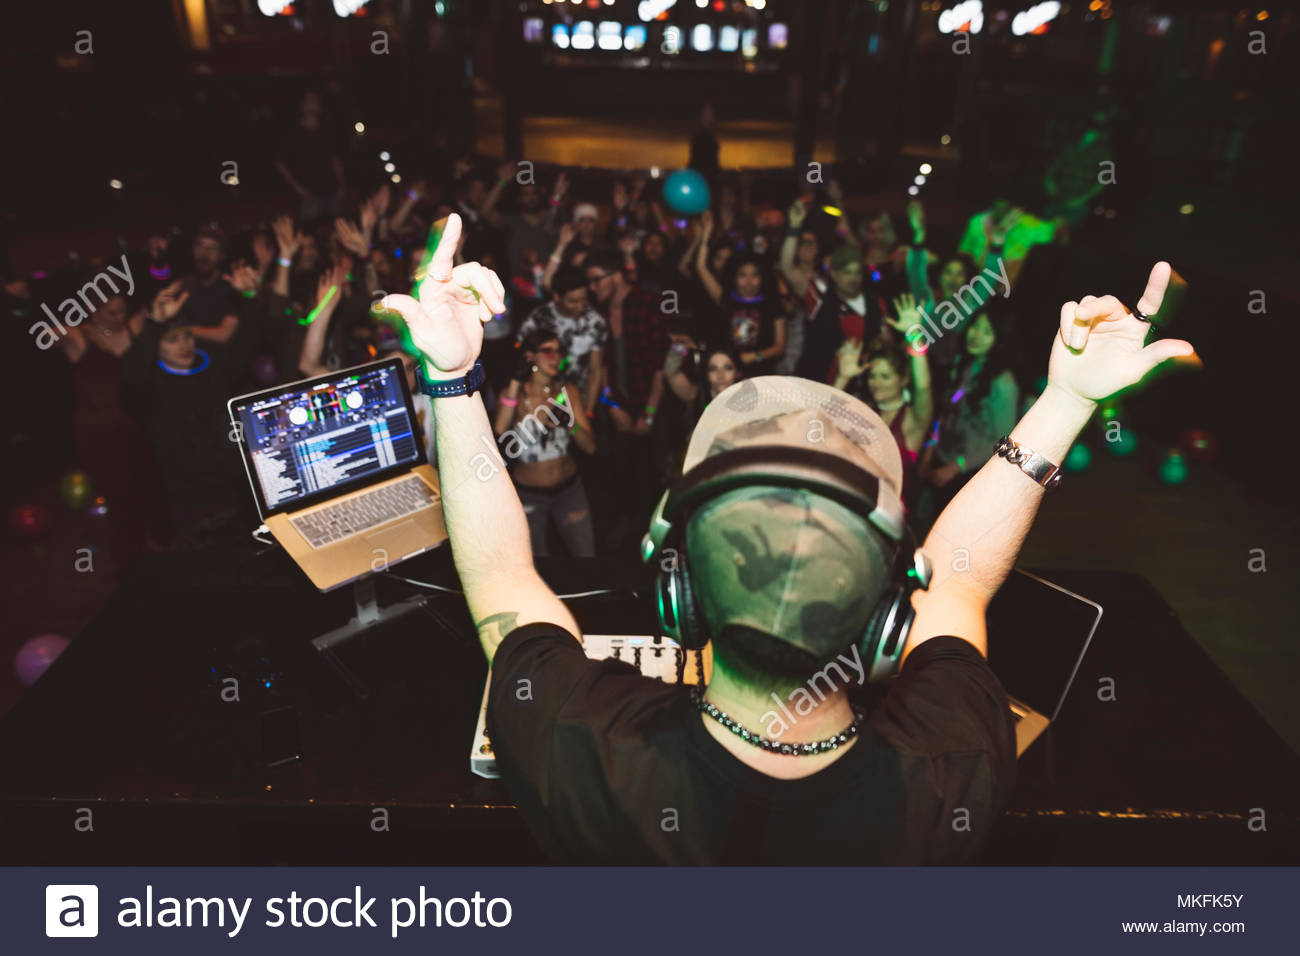 Enthusiastic DJ on stage gesturing to crowd in nightclub Stock Photo